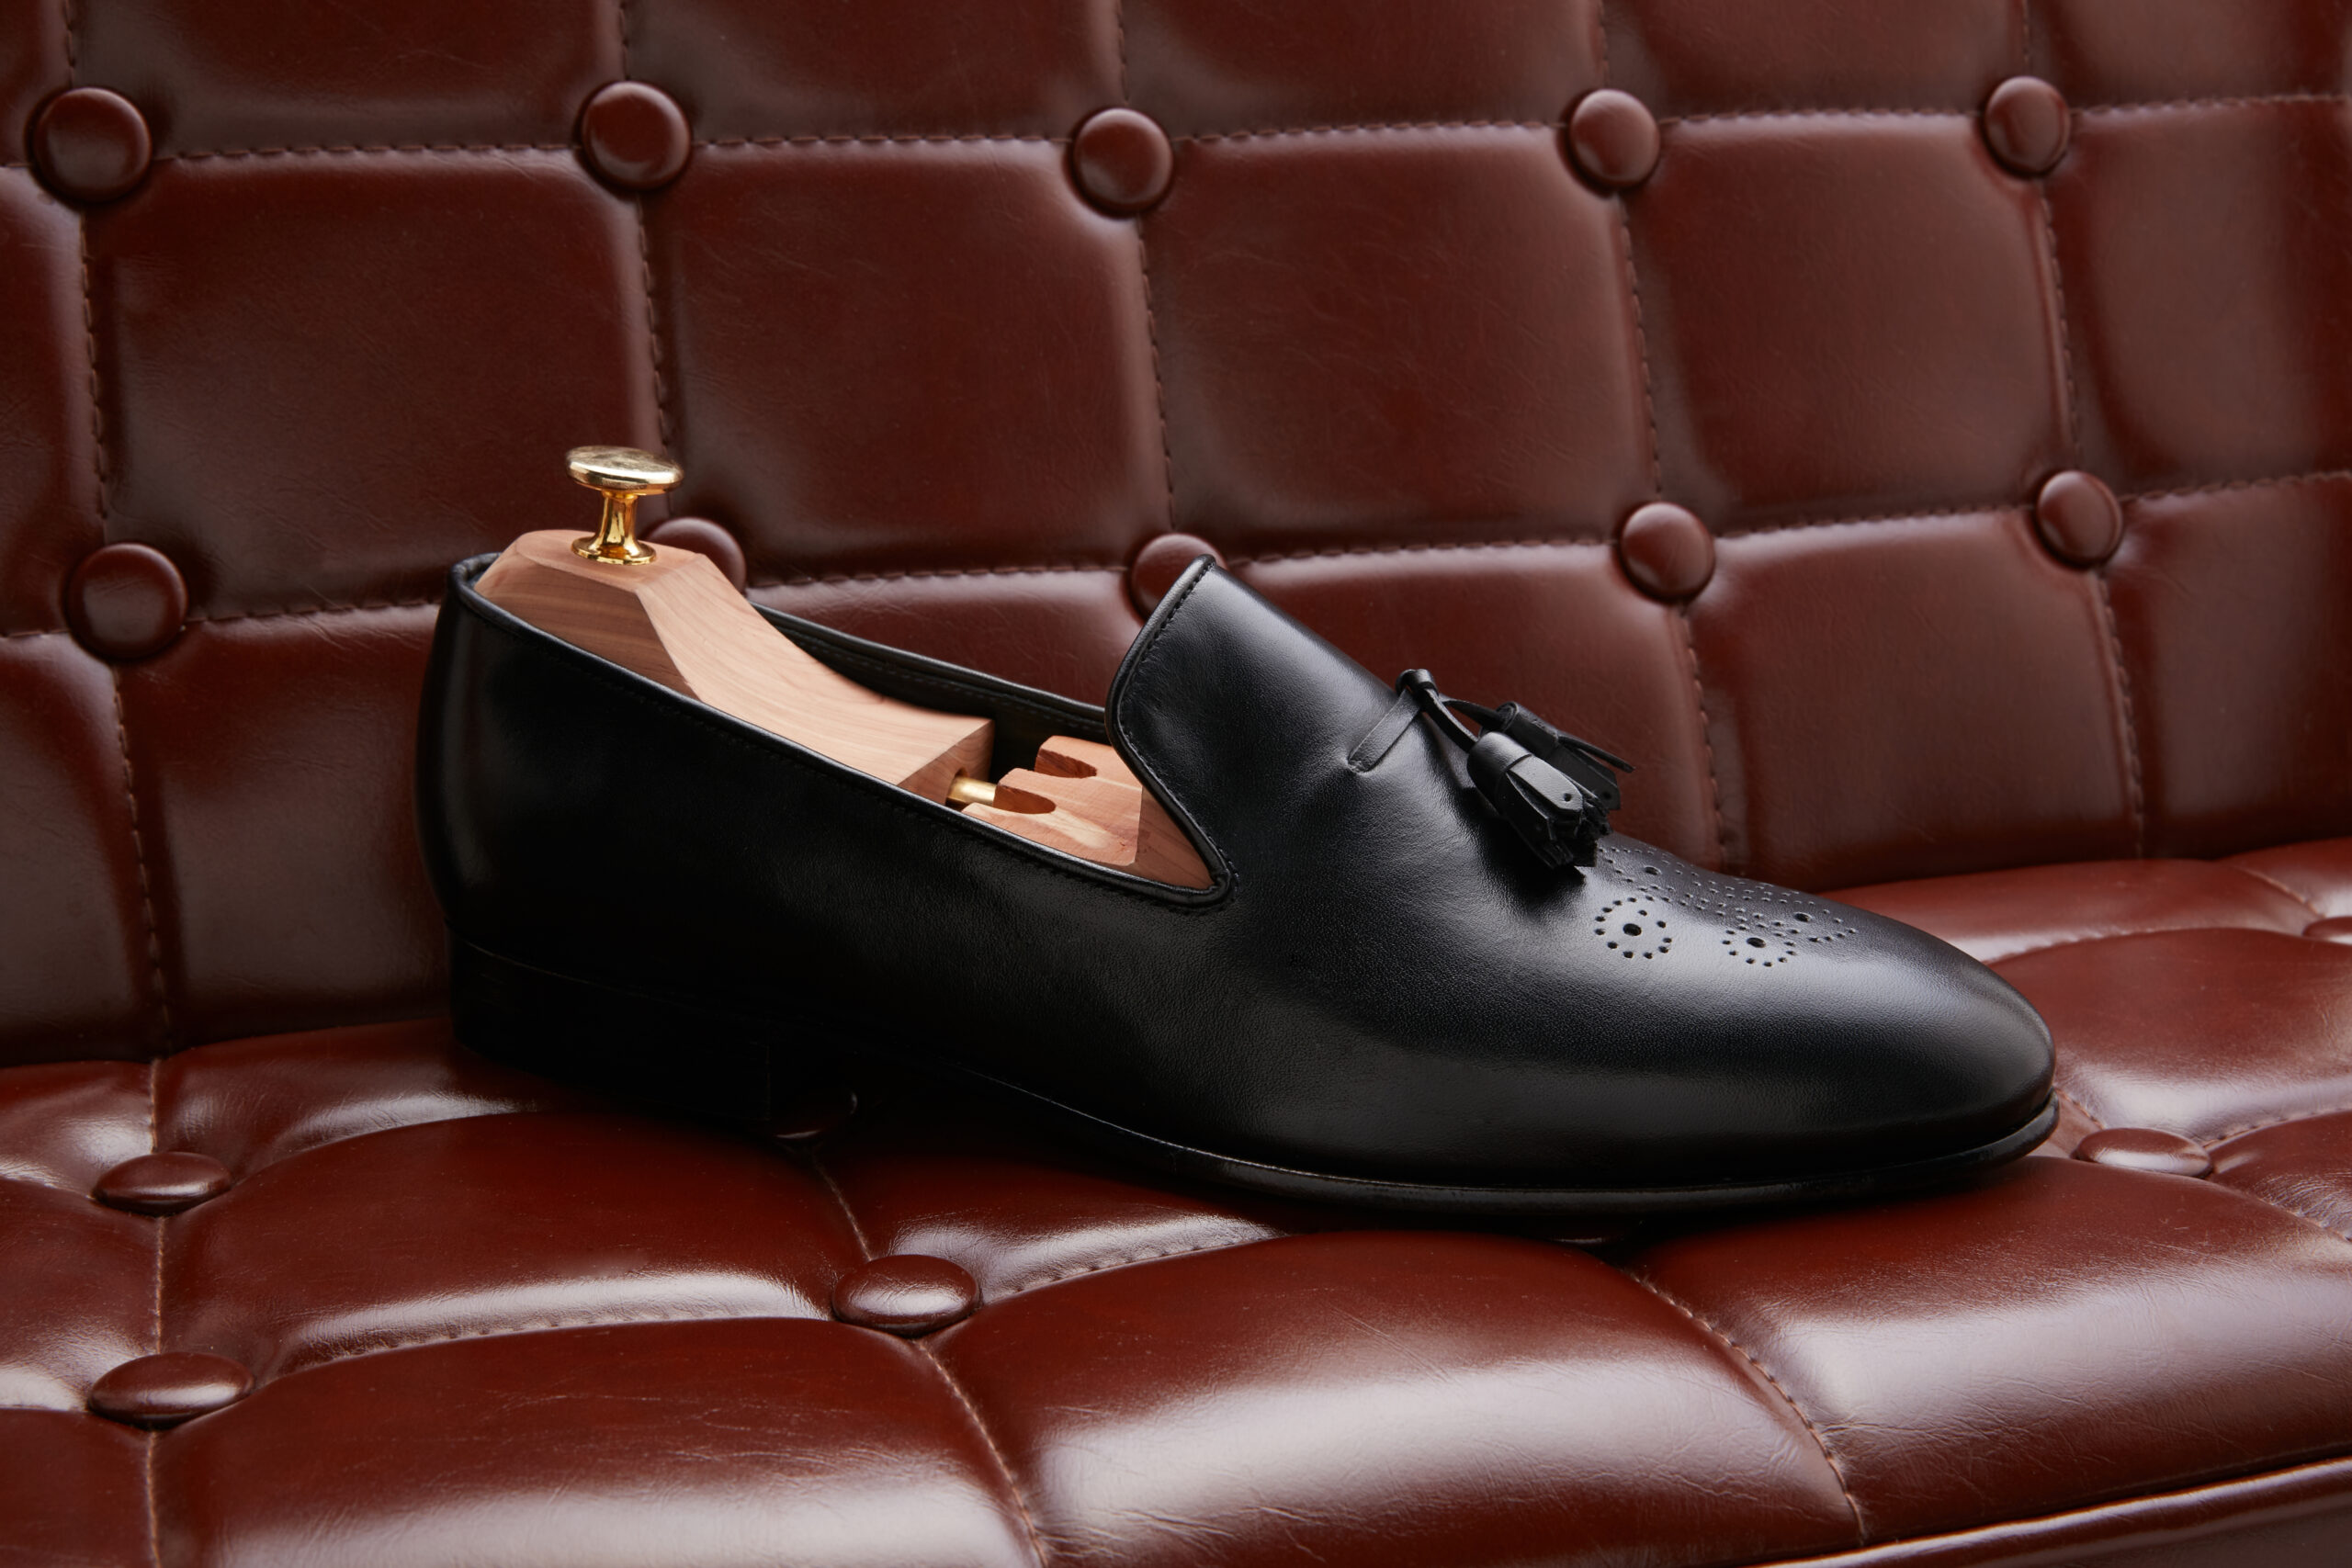 Lomaistro Calzature - Stylish Shoes, Clothing and Accessories for the Whole  Family